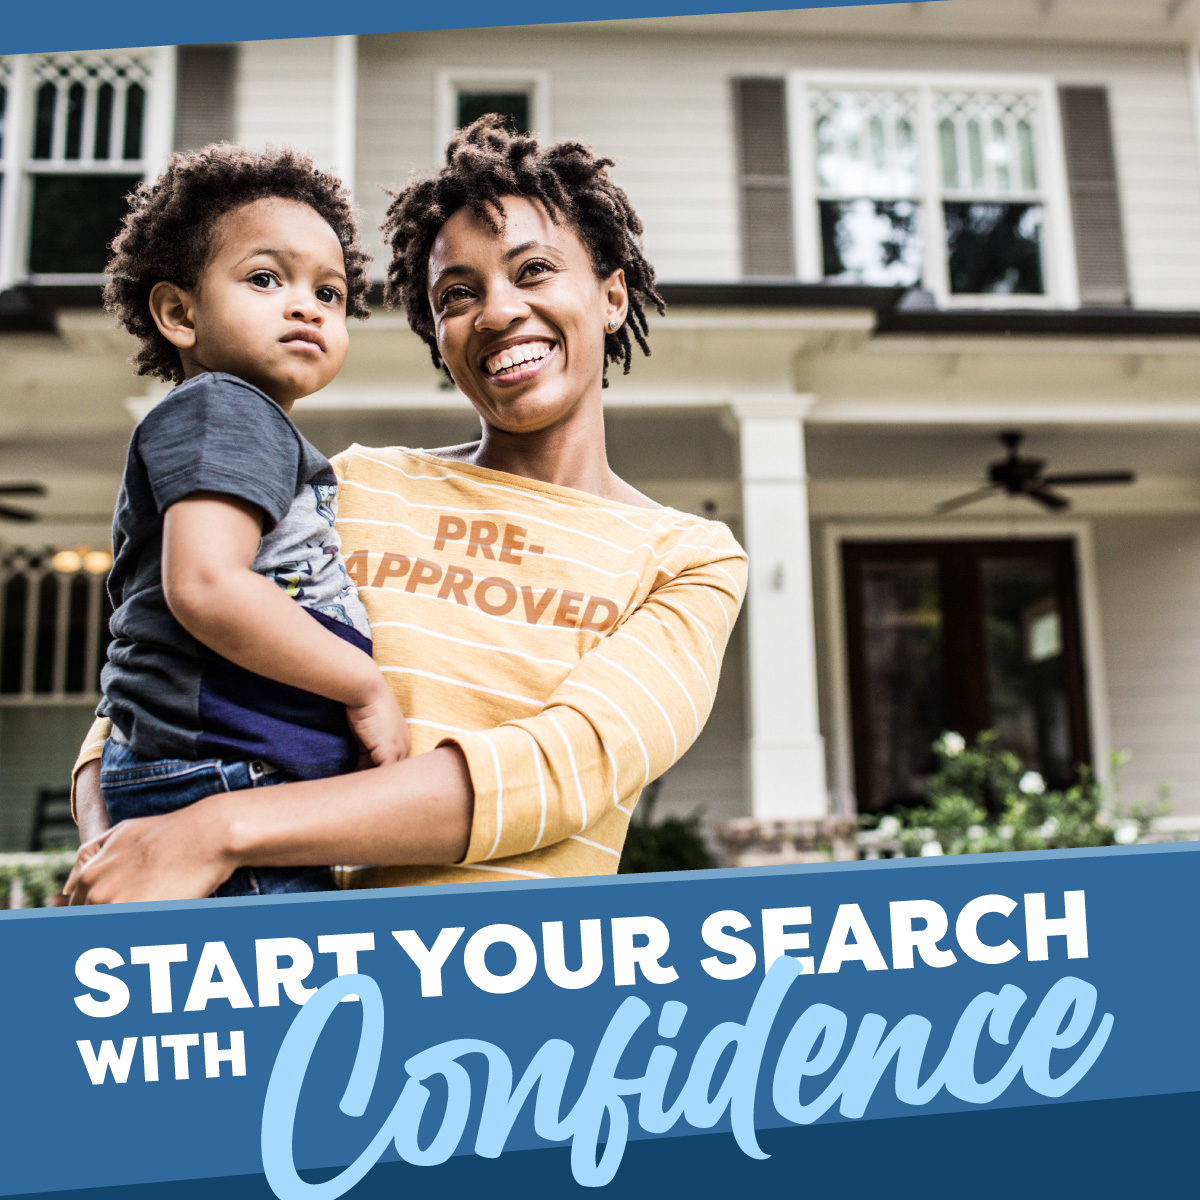 Many first-time homebuyers start house hunting before getting a mortgage pre-approval. This can lead to disappointment if they fall in love with a house only to find out they can't afford it. Call me today to get started! #Mortgage #Homebuyers #MortgageBroker #HomeLoans